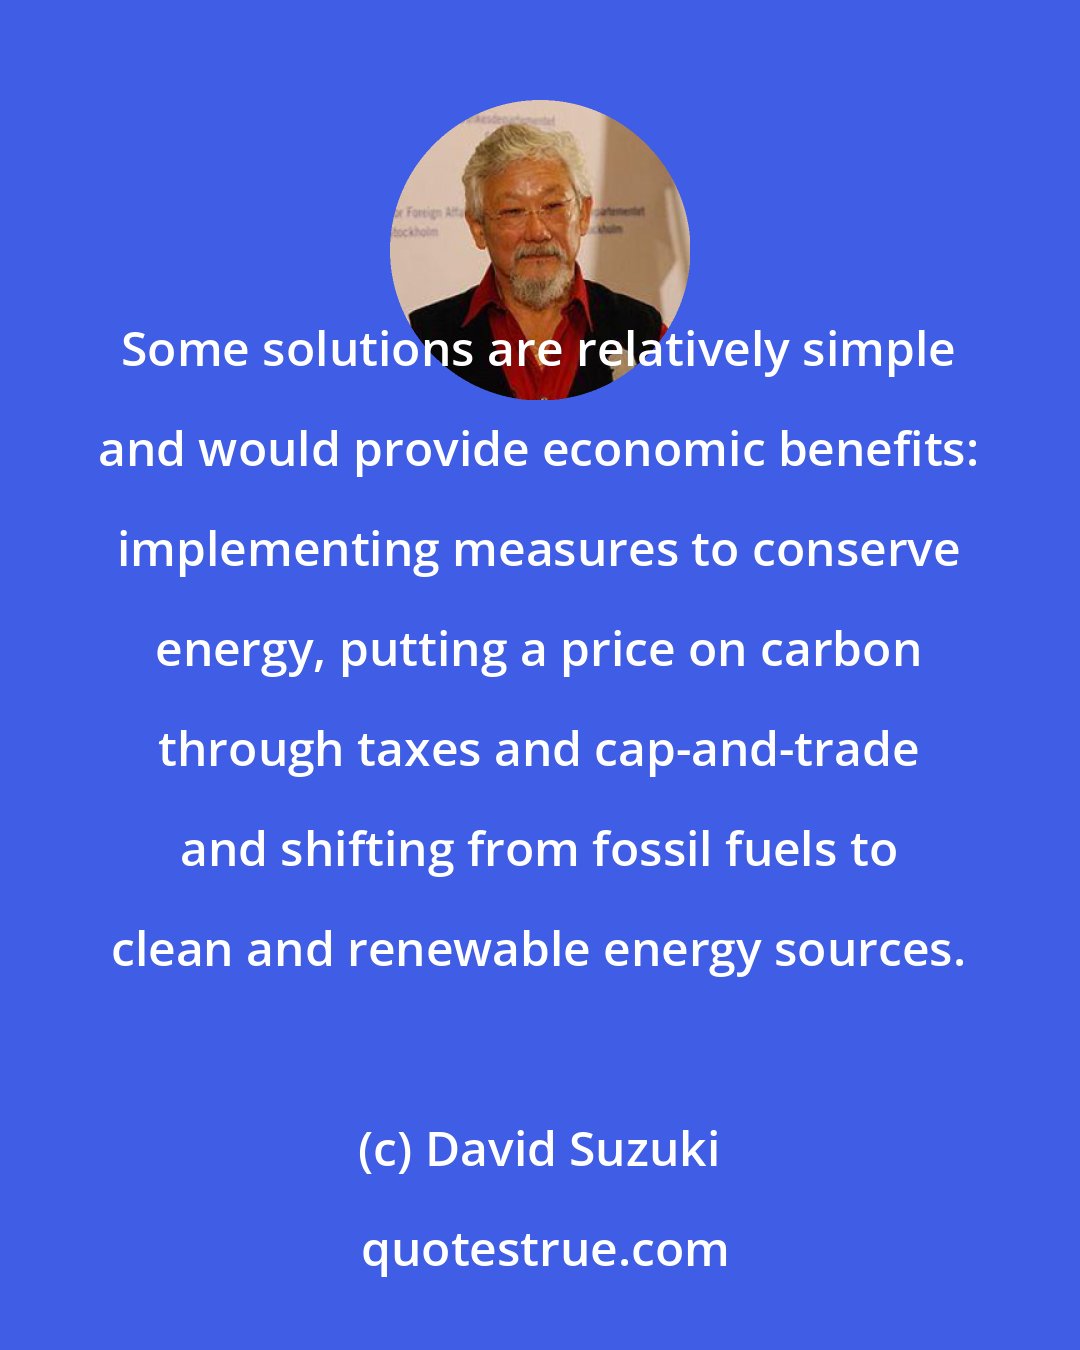 David Suzuki: Some solutions are relatively simple and would provide economic benefits: implementing measures to conserve energy, putting a price on carbon through taxes and cap-and-trade and shifting from fossil fuels to clean and renewable energy sources.